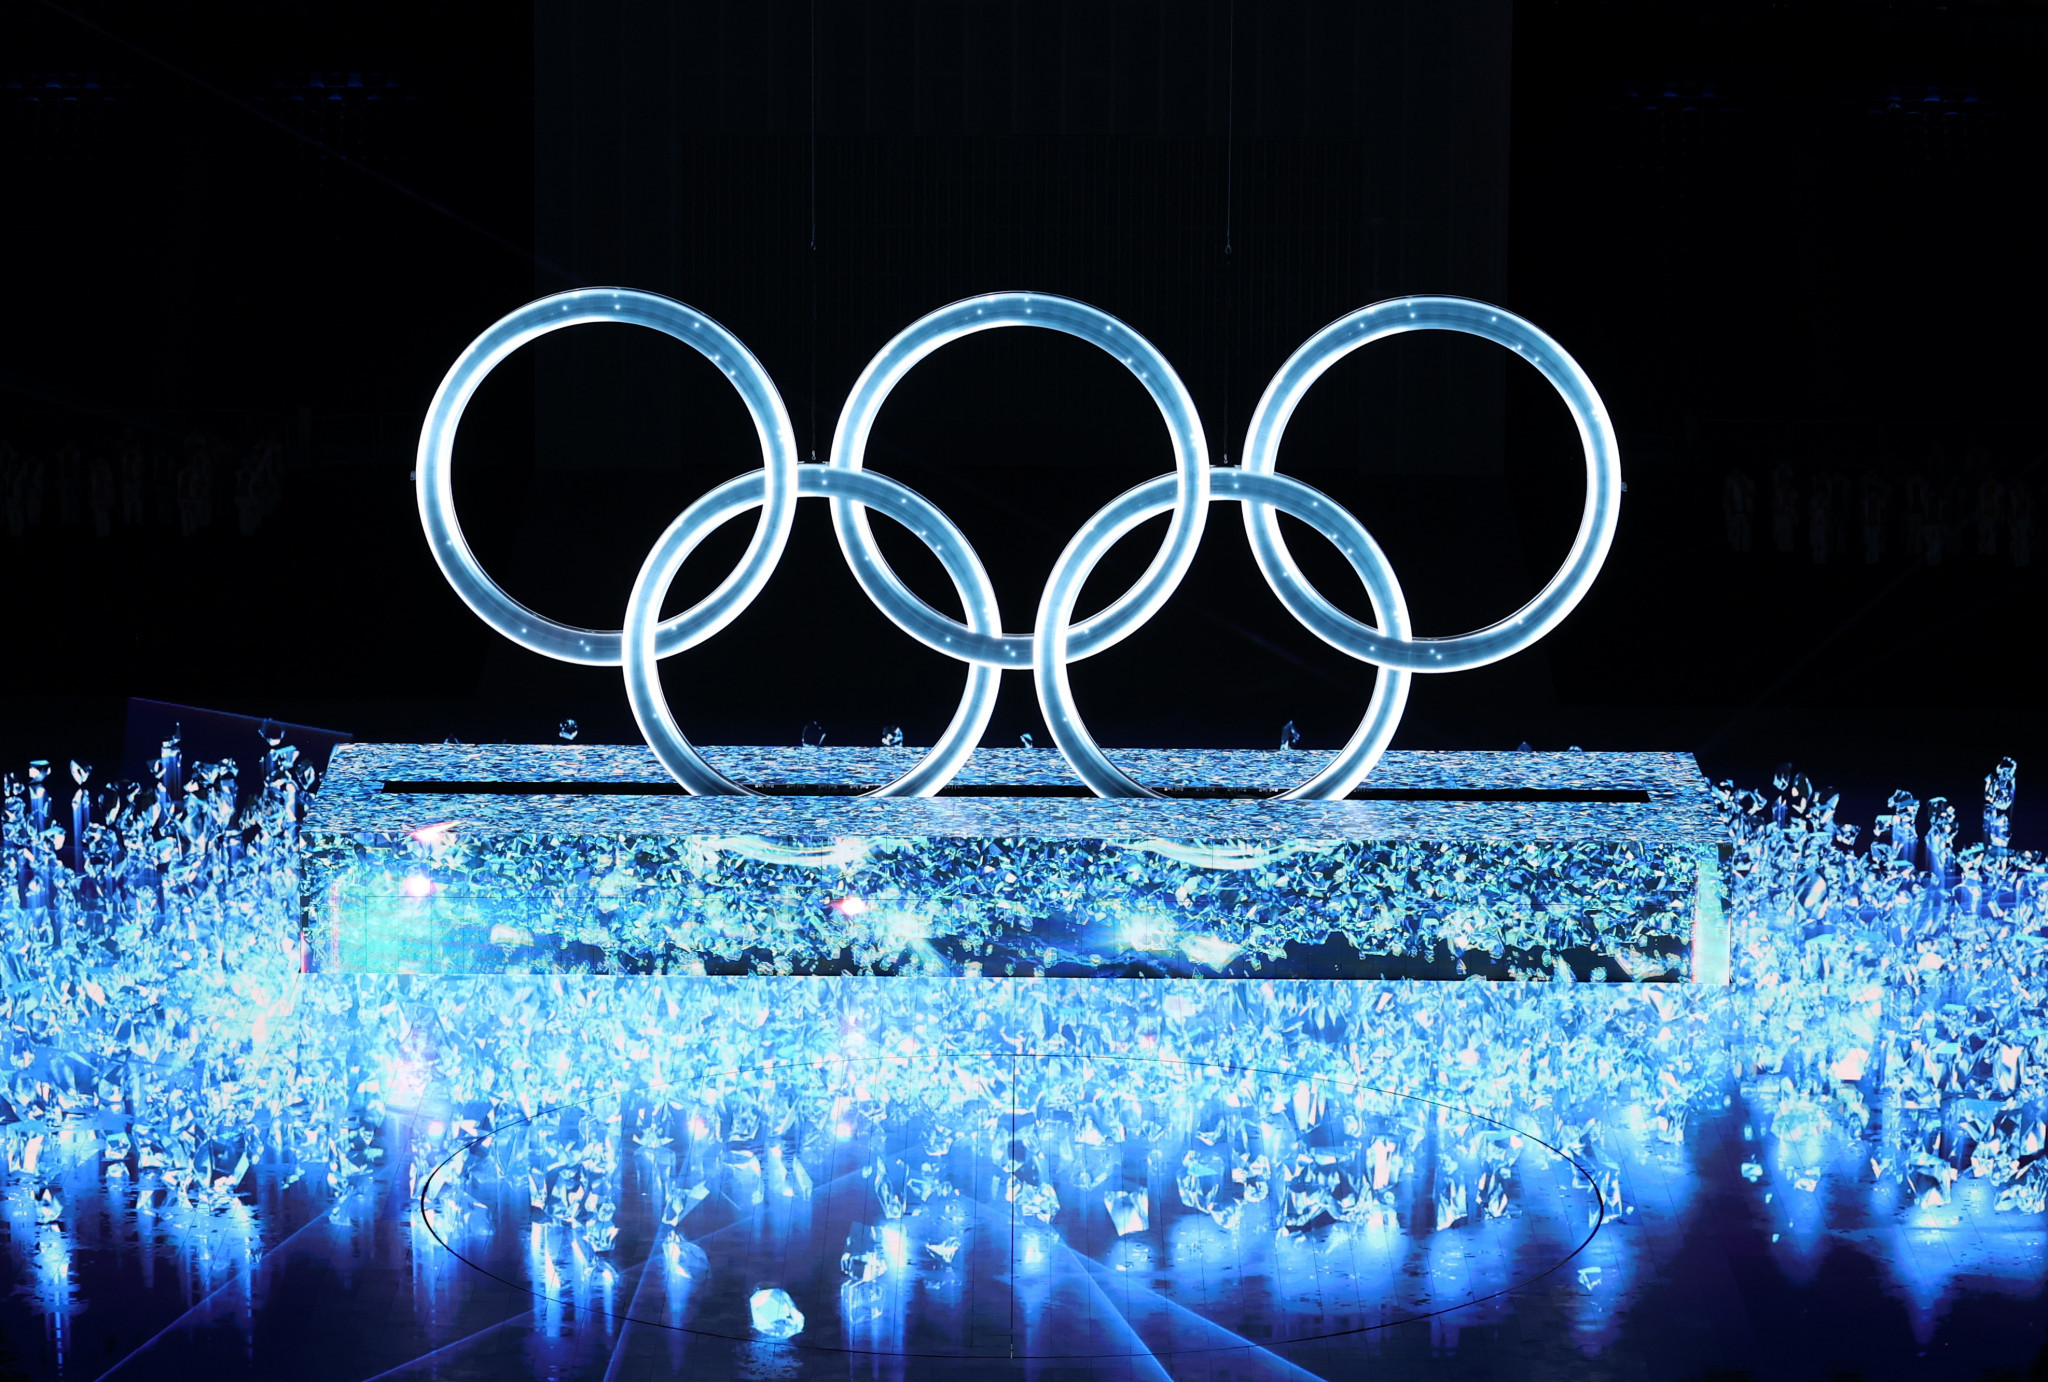 IOC delays plans to award 2030 Winter Olympics at next Session